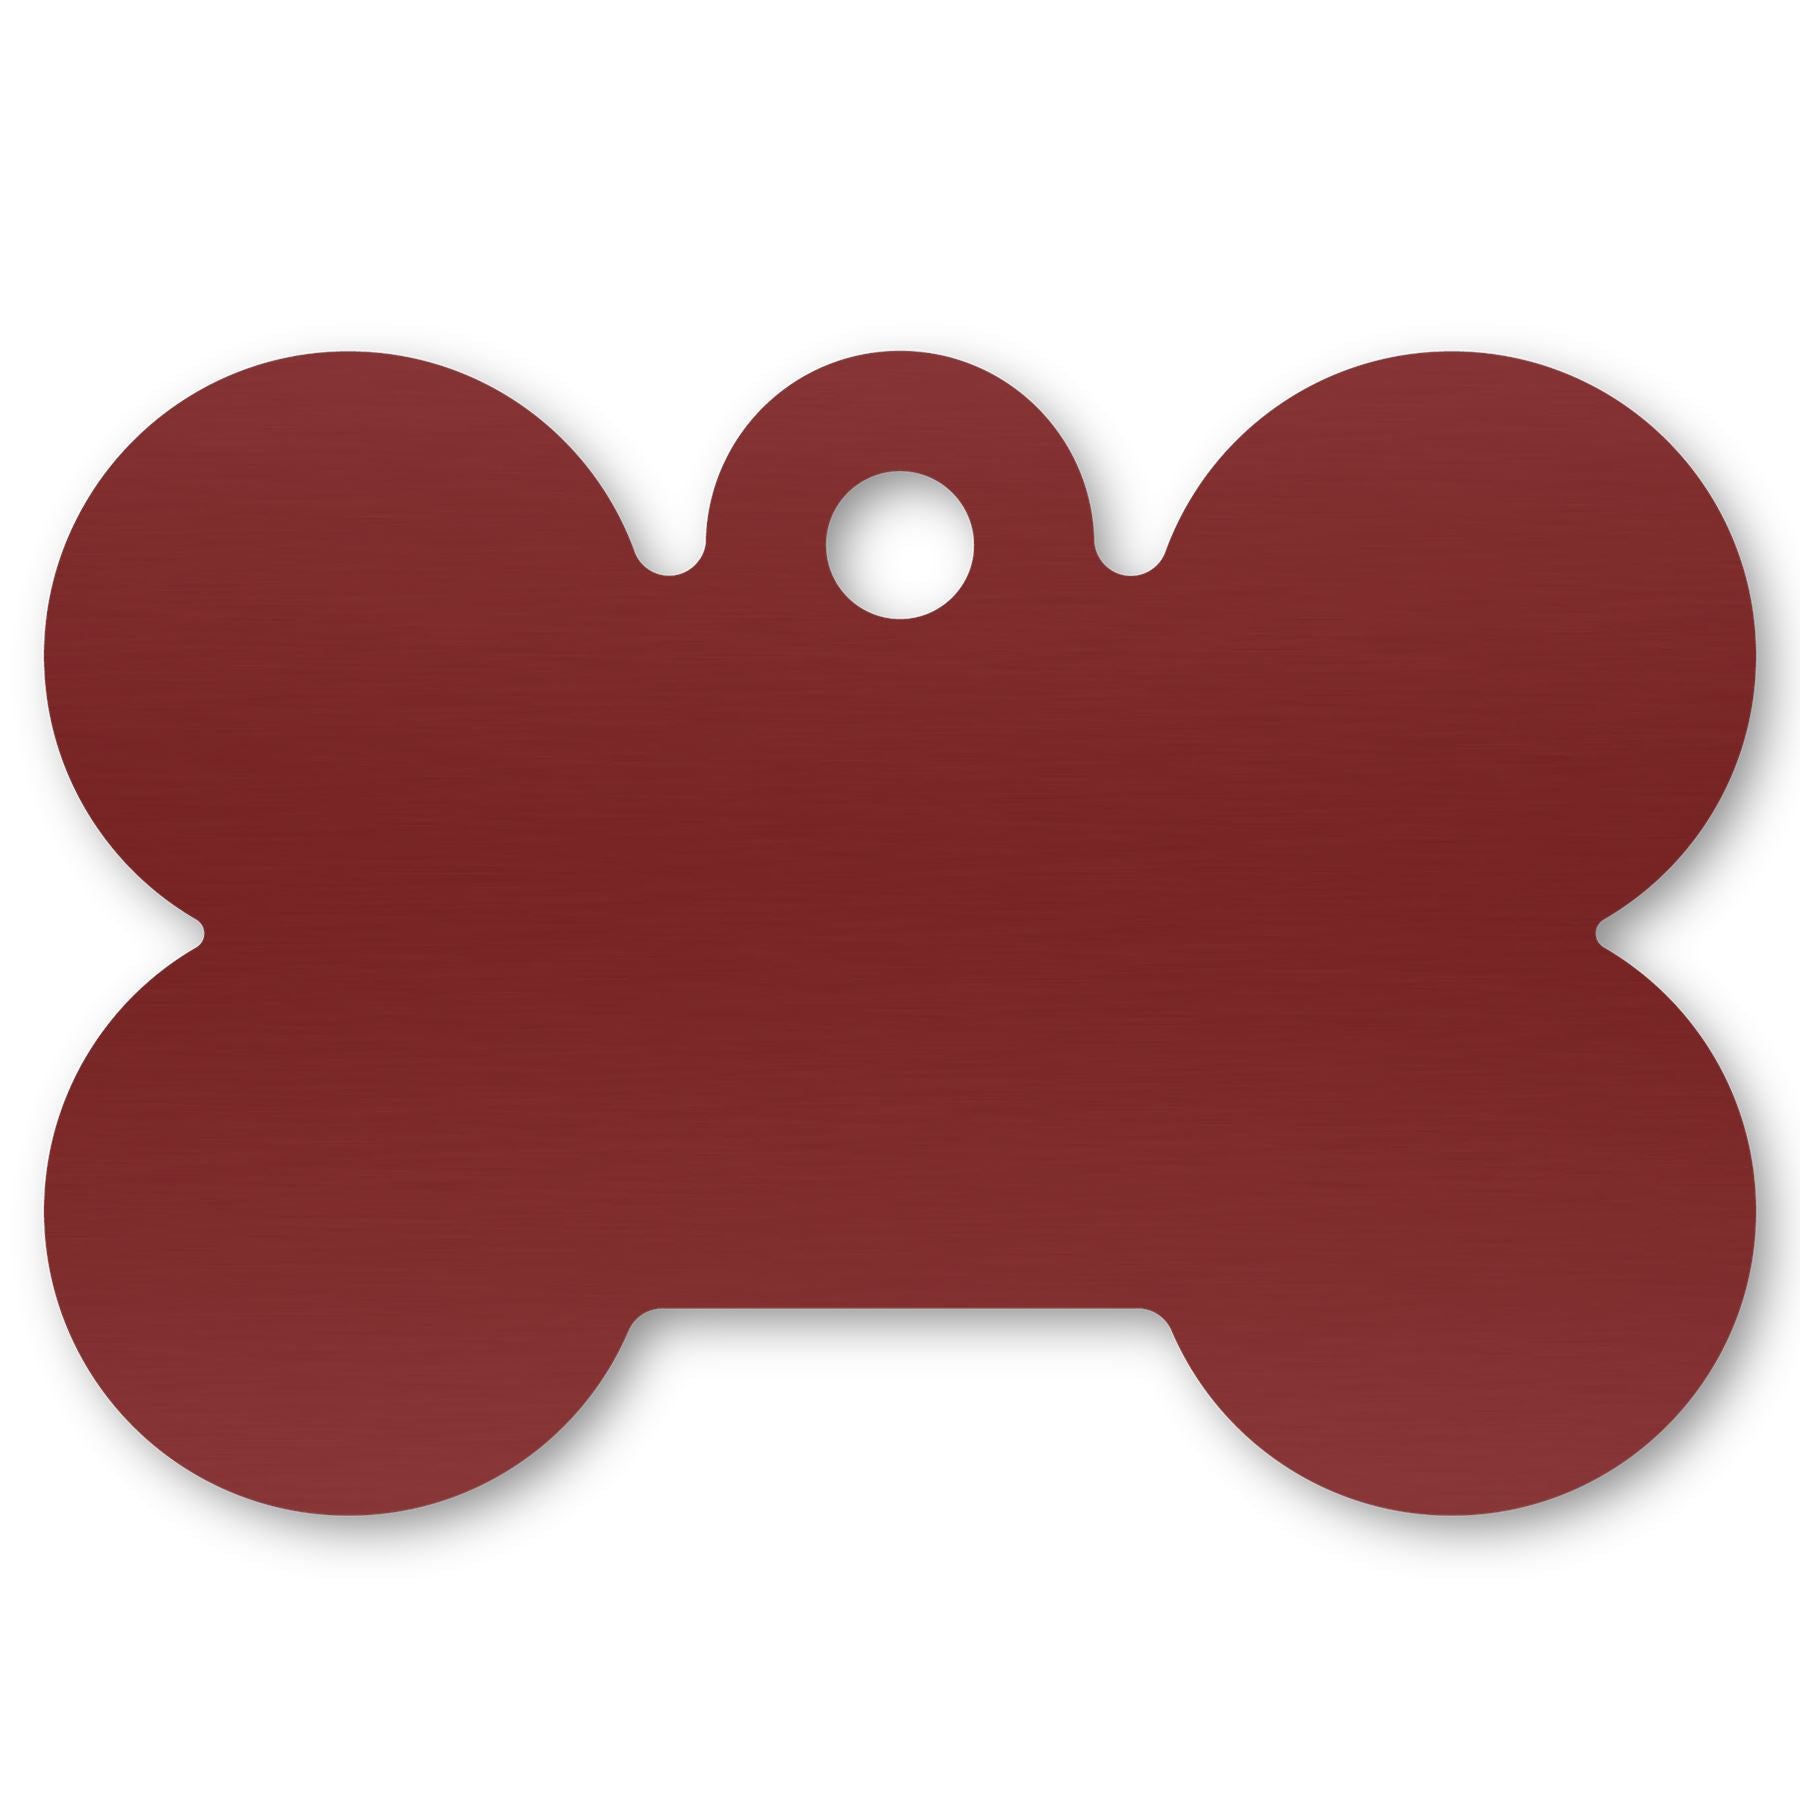 Anodized Aluminum Dog Bone Shaped Tags, 1-1/32" x 1-5/16" with 1/8" Hole, Laser Engraved Metal Tags Craftworks NW Red 